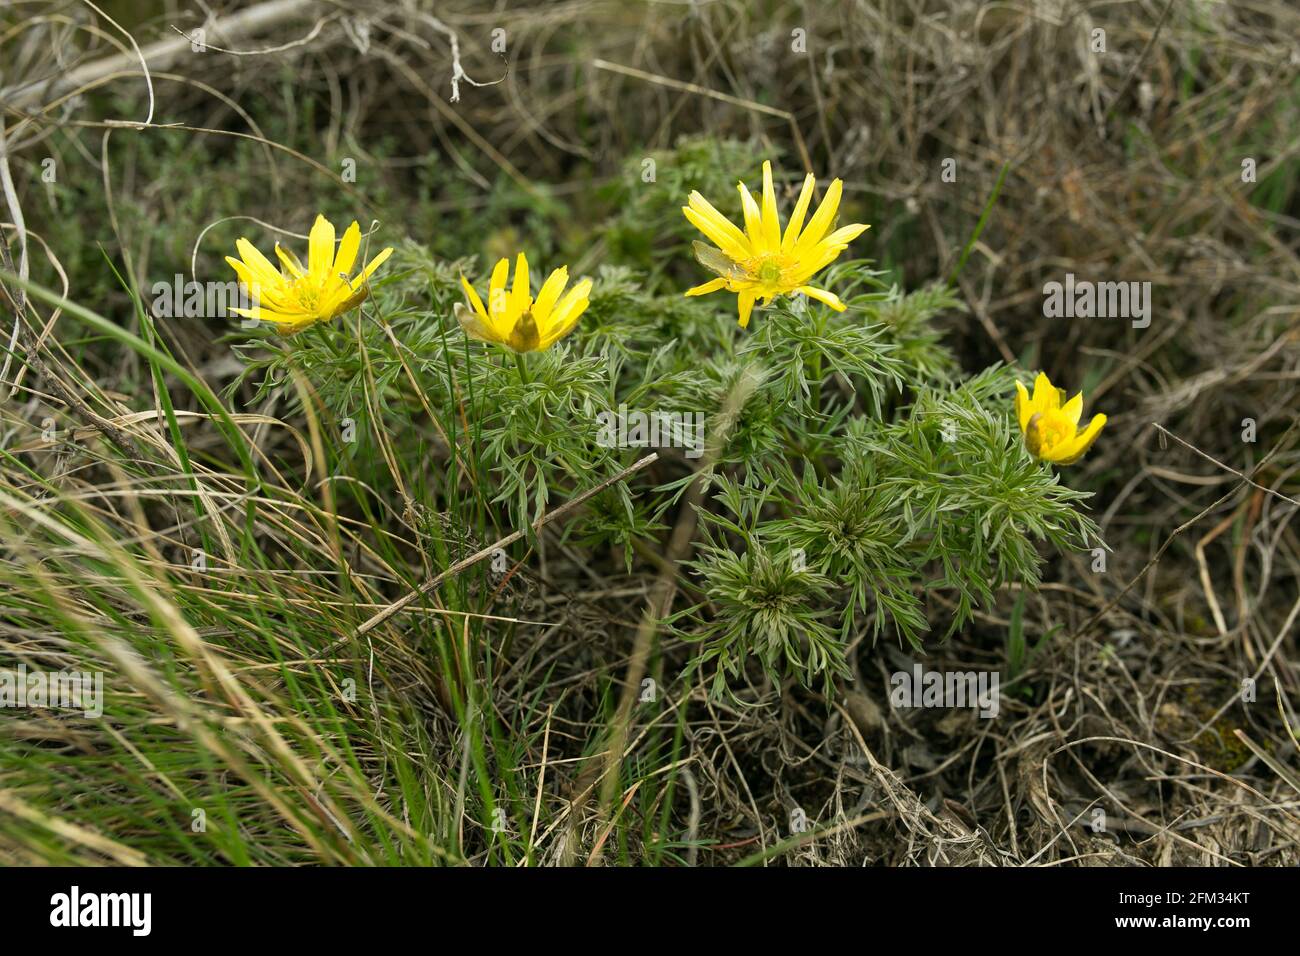 Spring adonis flower in the fields and hills, Ukraine. The pheasant's eye grows in sheep pasture in early spring. Large yellow flowers. Stock Photo